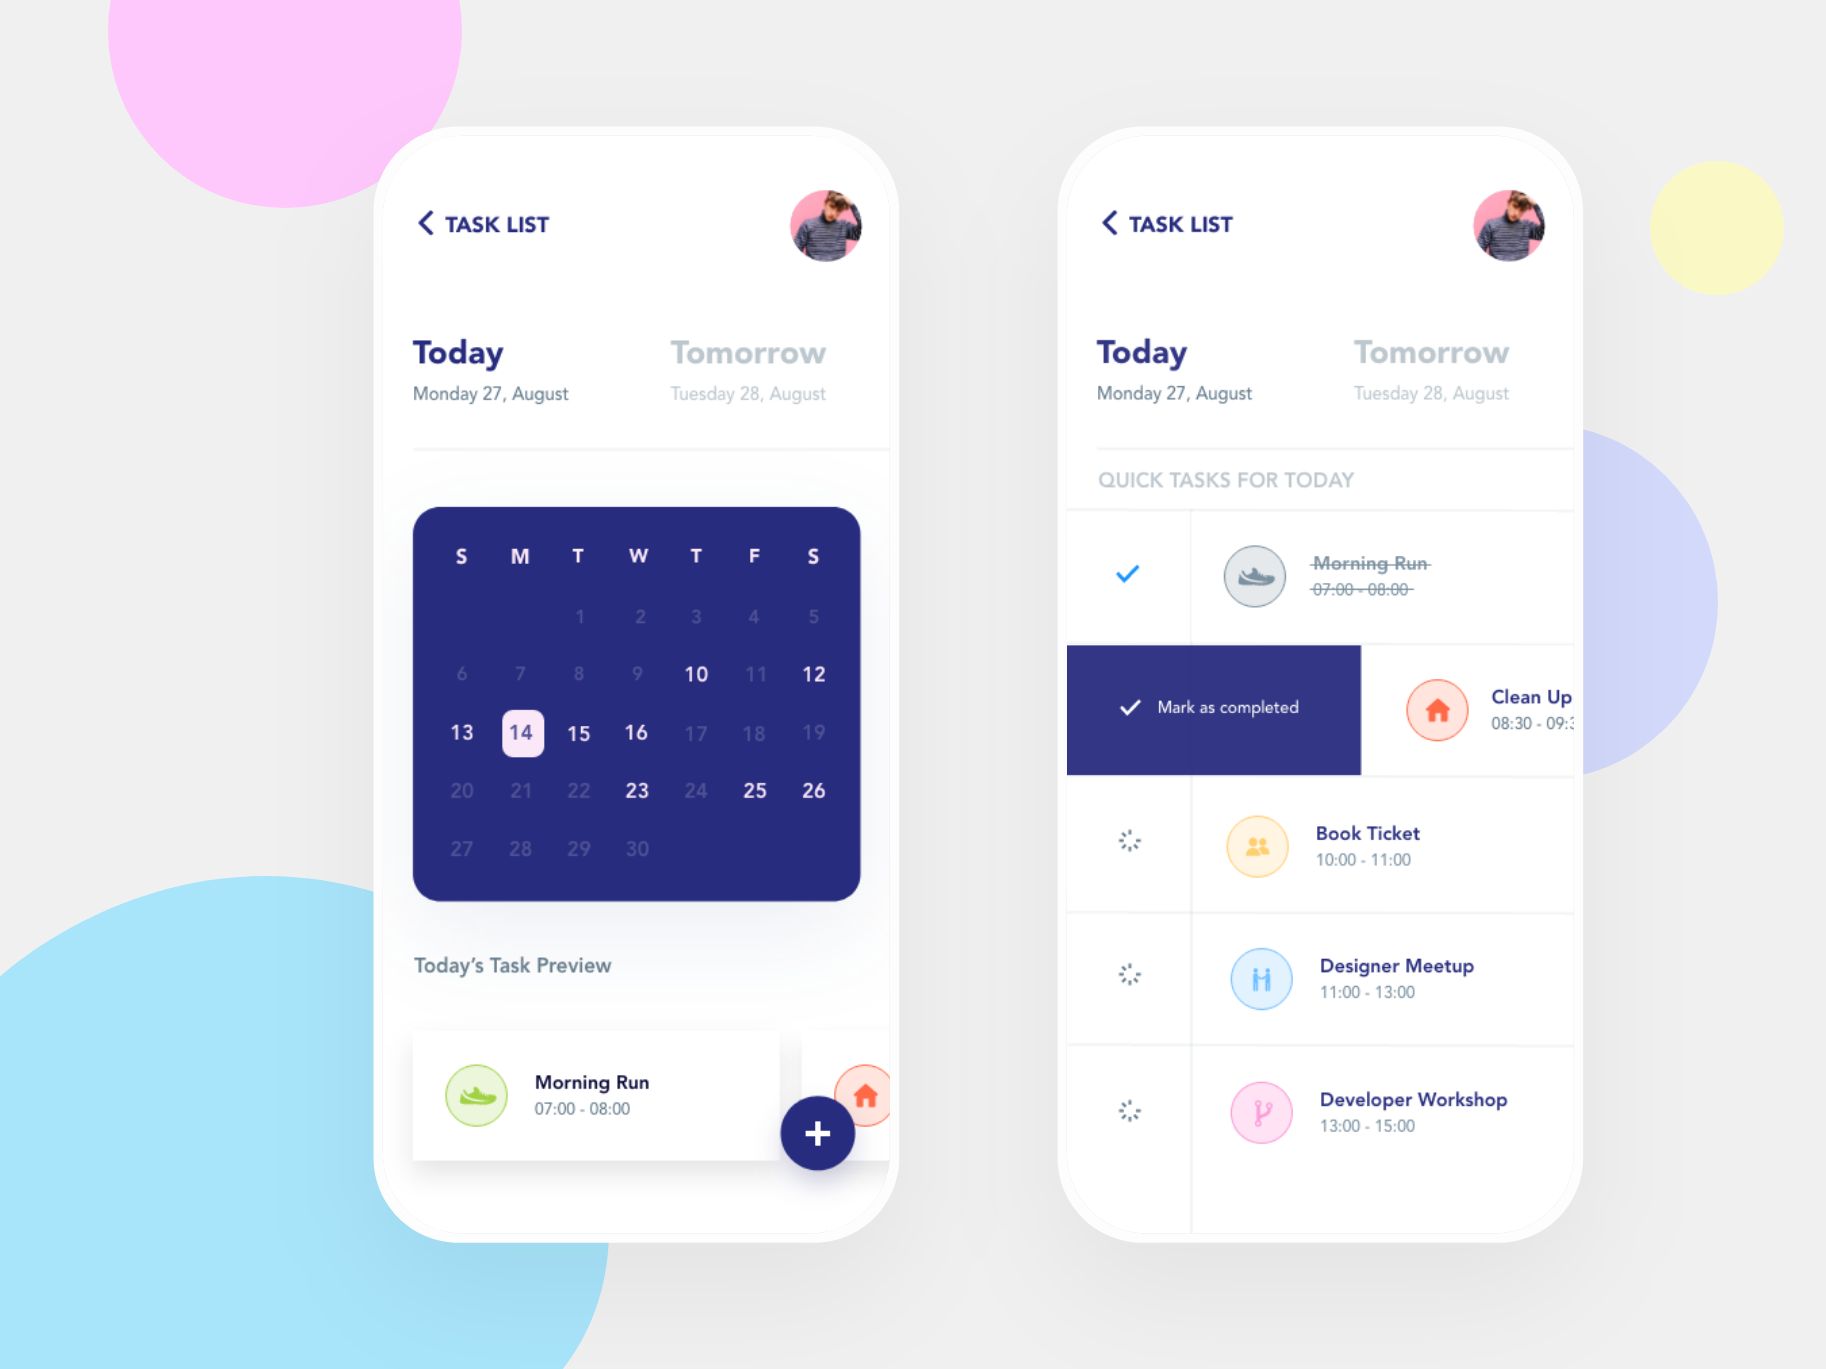 Task Manager App Concept by Ghulam Mustafa on Dribbble